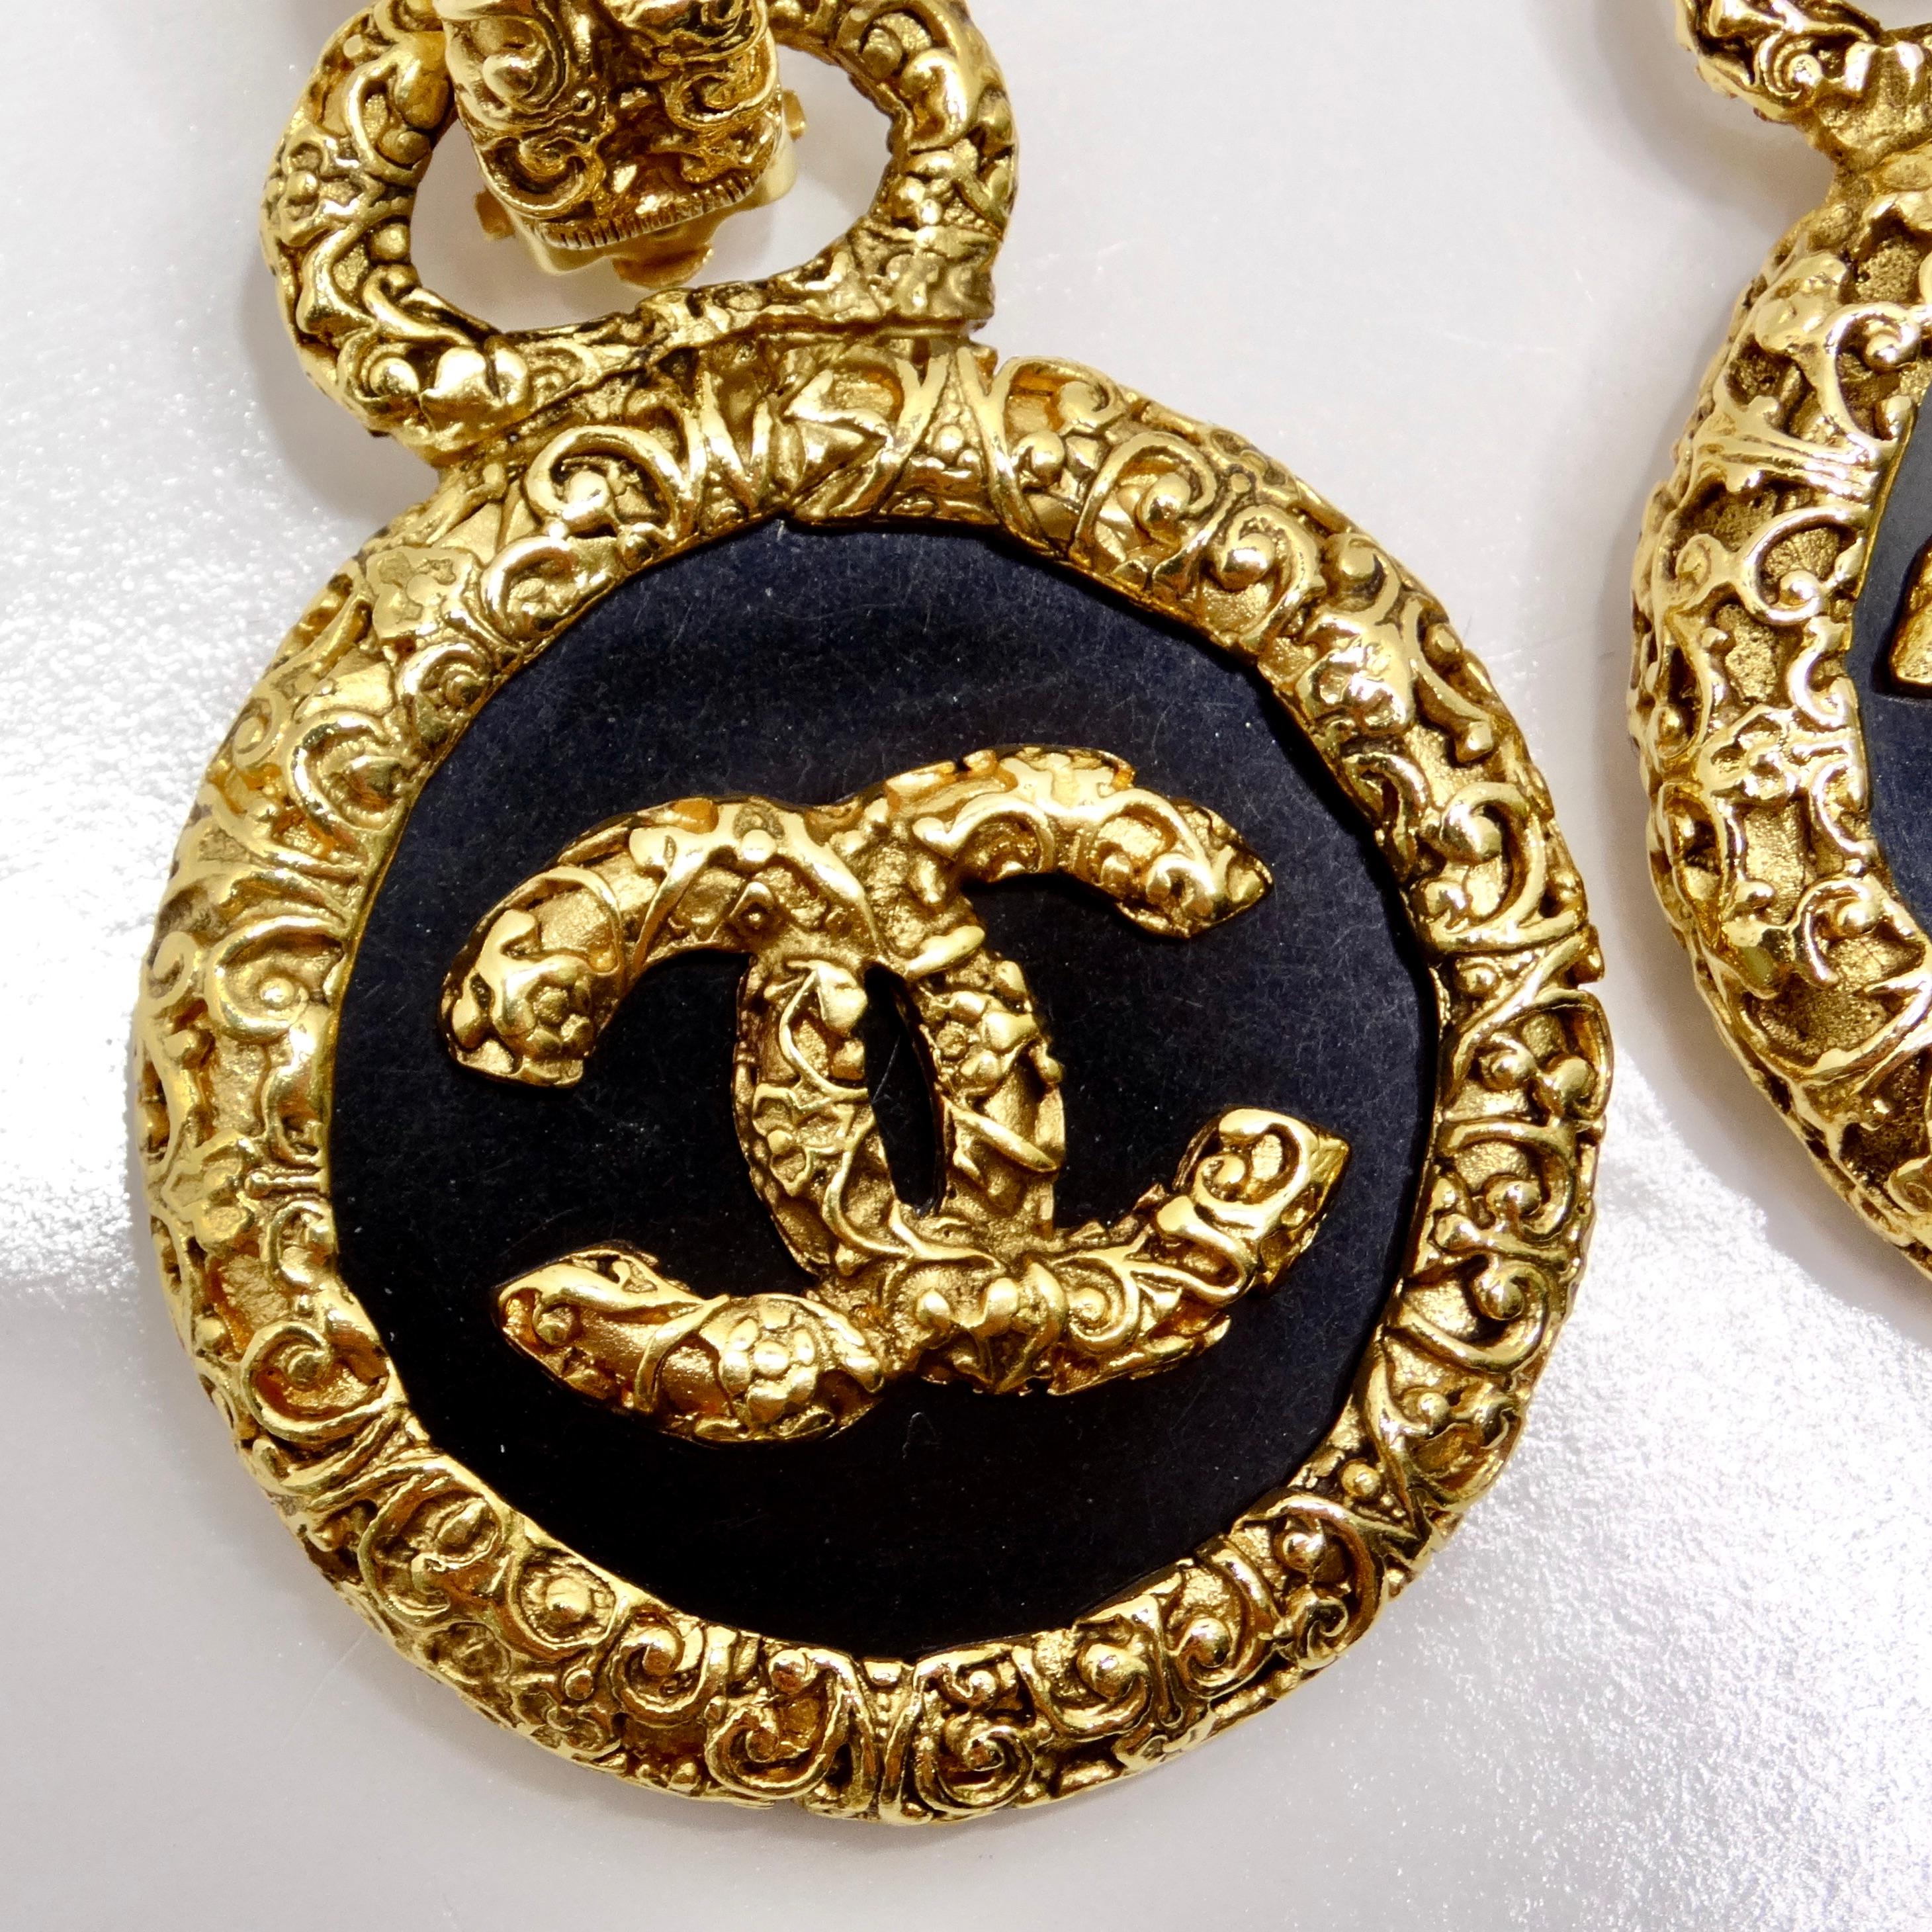 Chanel 1993 Gold Tone Black CC Medallion Florentine Earrings In Excellent Condition For Sale In Scottsdale, AZ